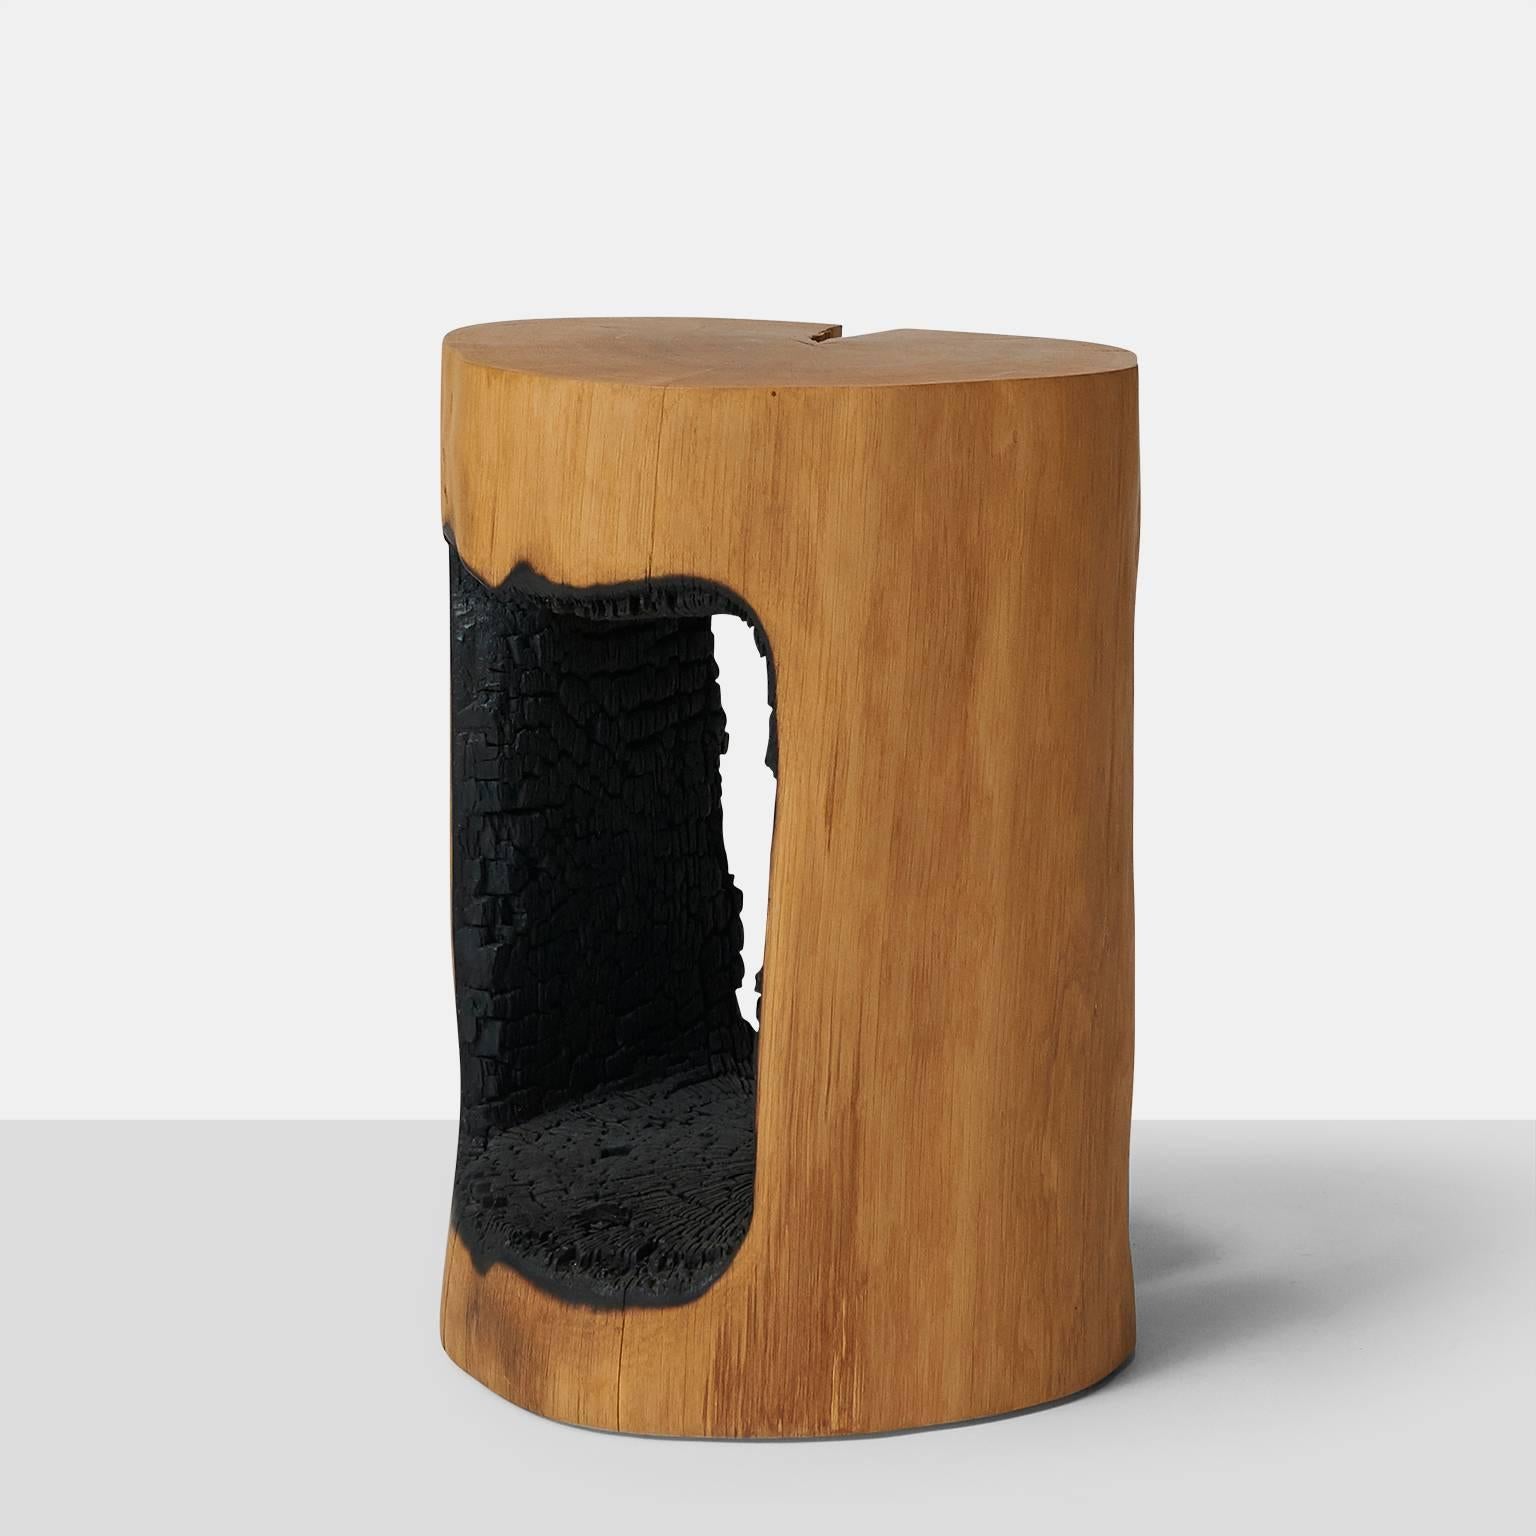 Side table in oak by Kaspar Hamacher.
A circular ausgebrannt side table by Kaspar Hamacher created by burning out the interior. Almond & Company is the exclusive gallery in the U.S. representing this artist.
Netherlands, circa 2016.